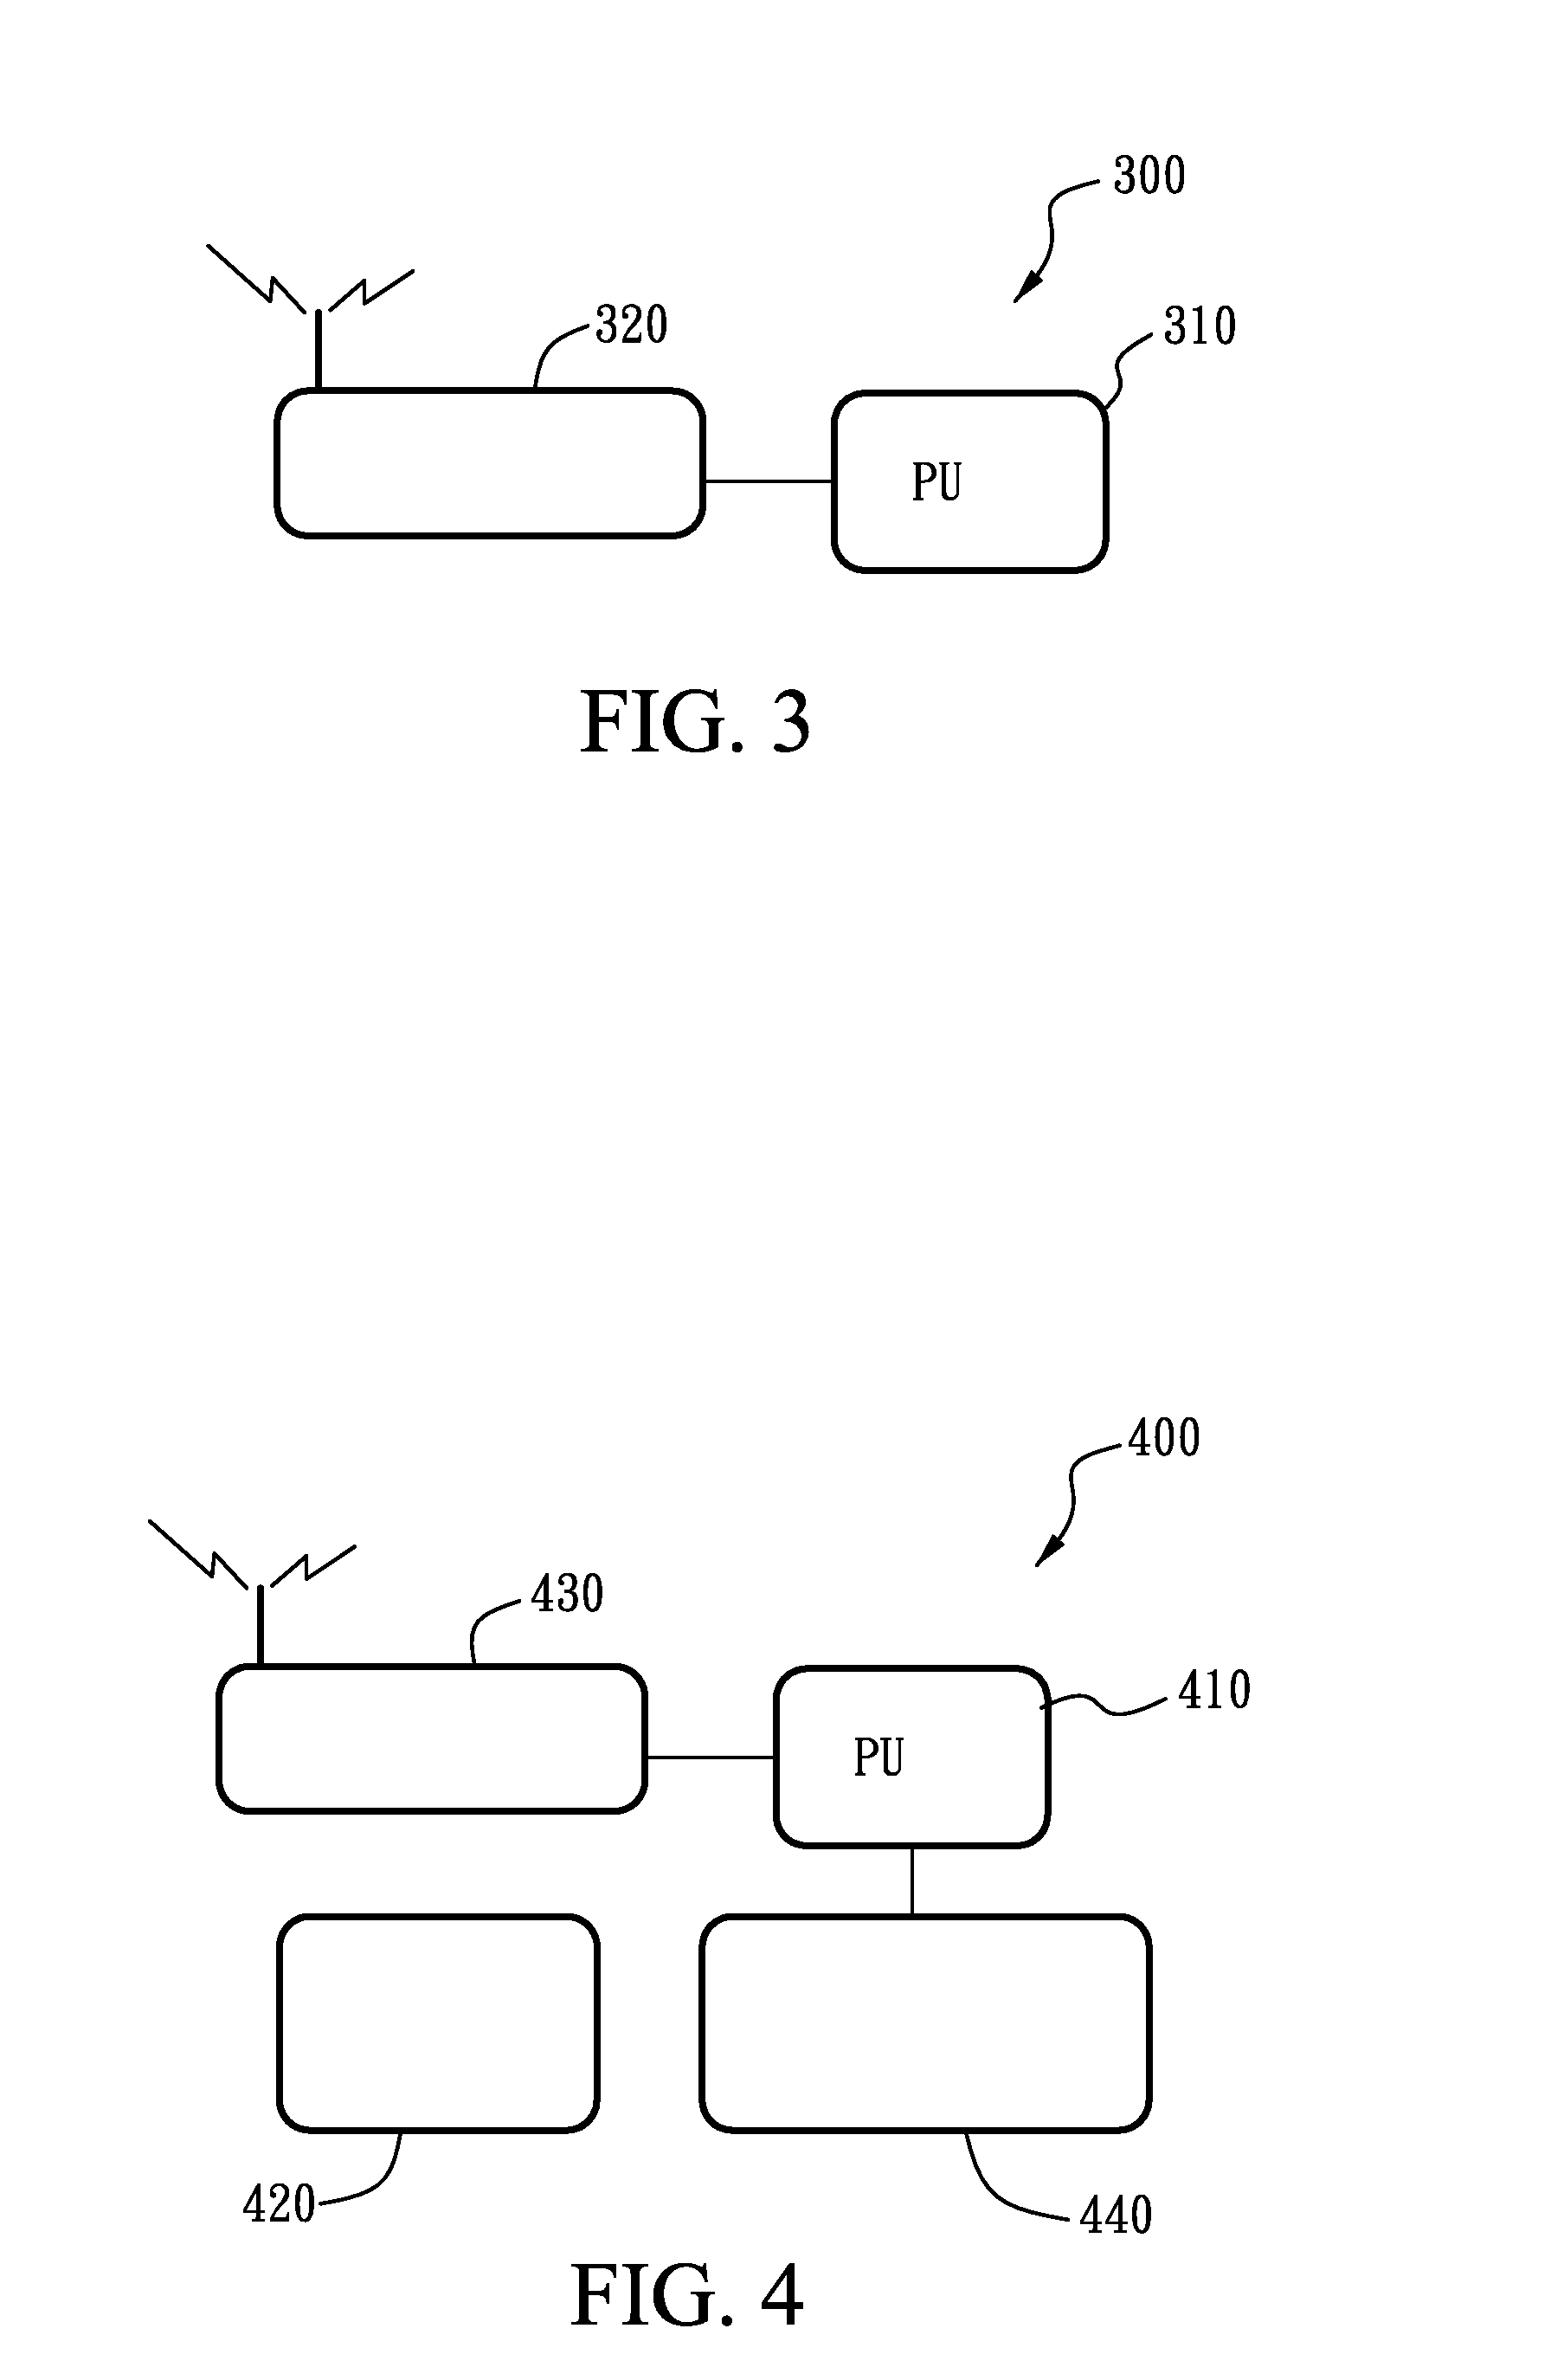 System and method of RFID wireless control